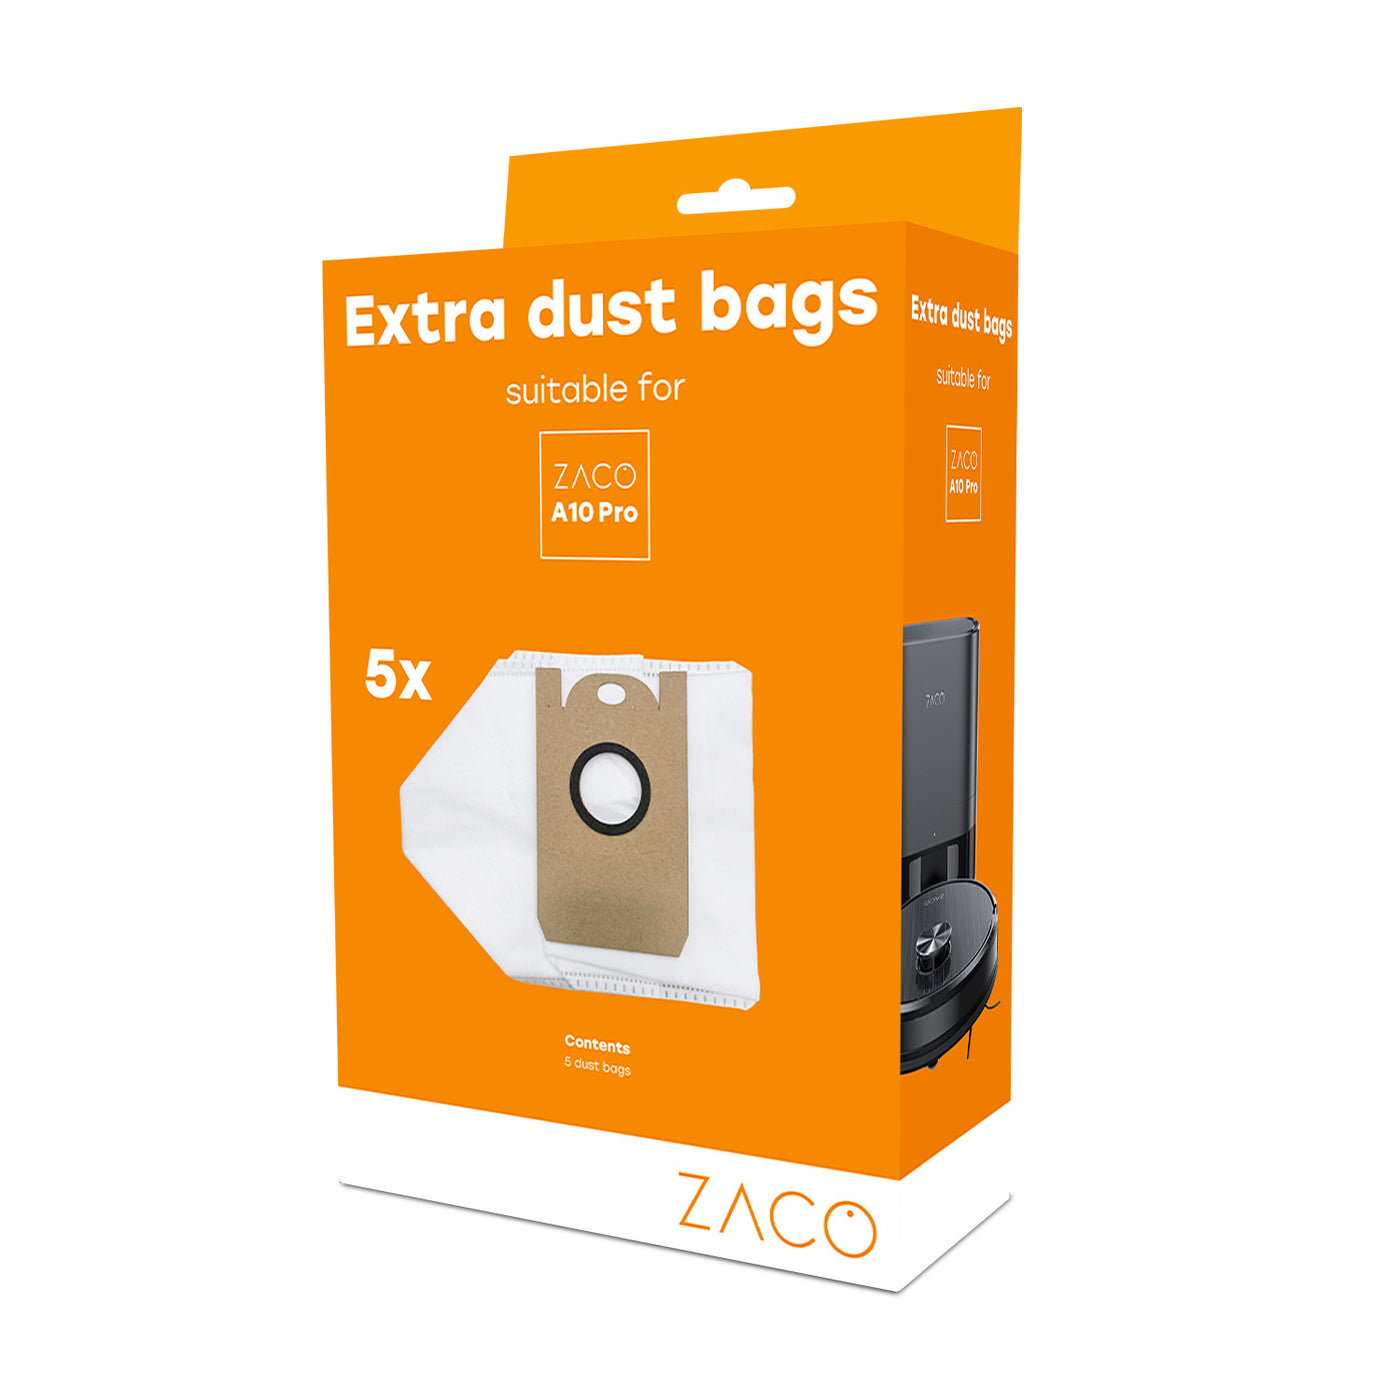 Dust bag set for ZACO A10 Pro